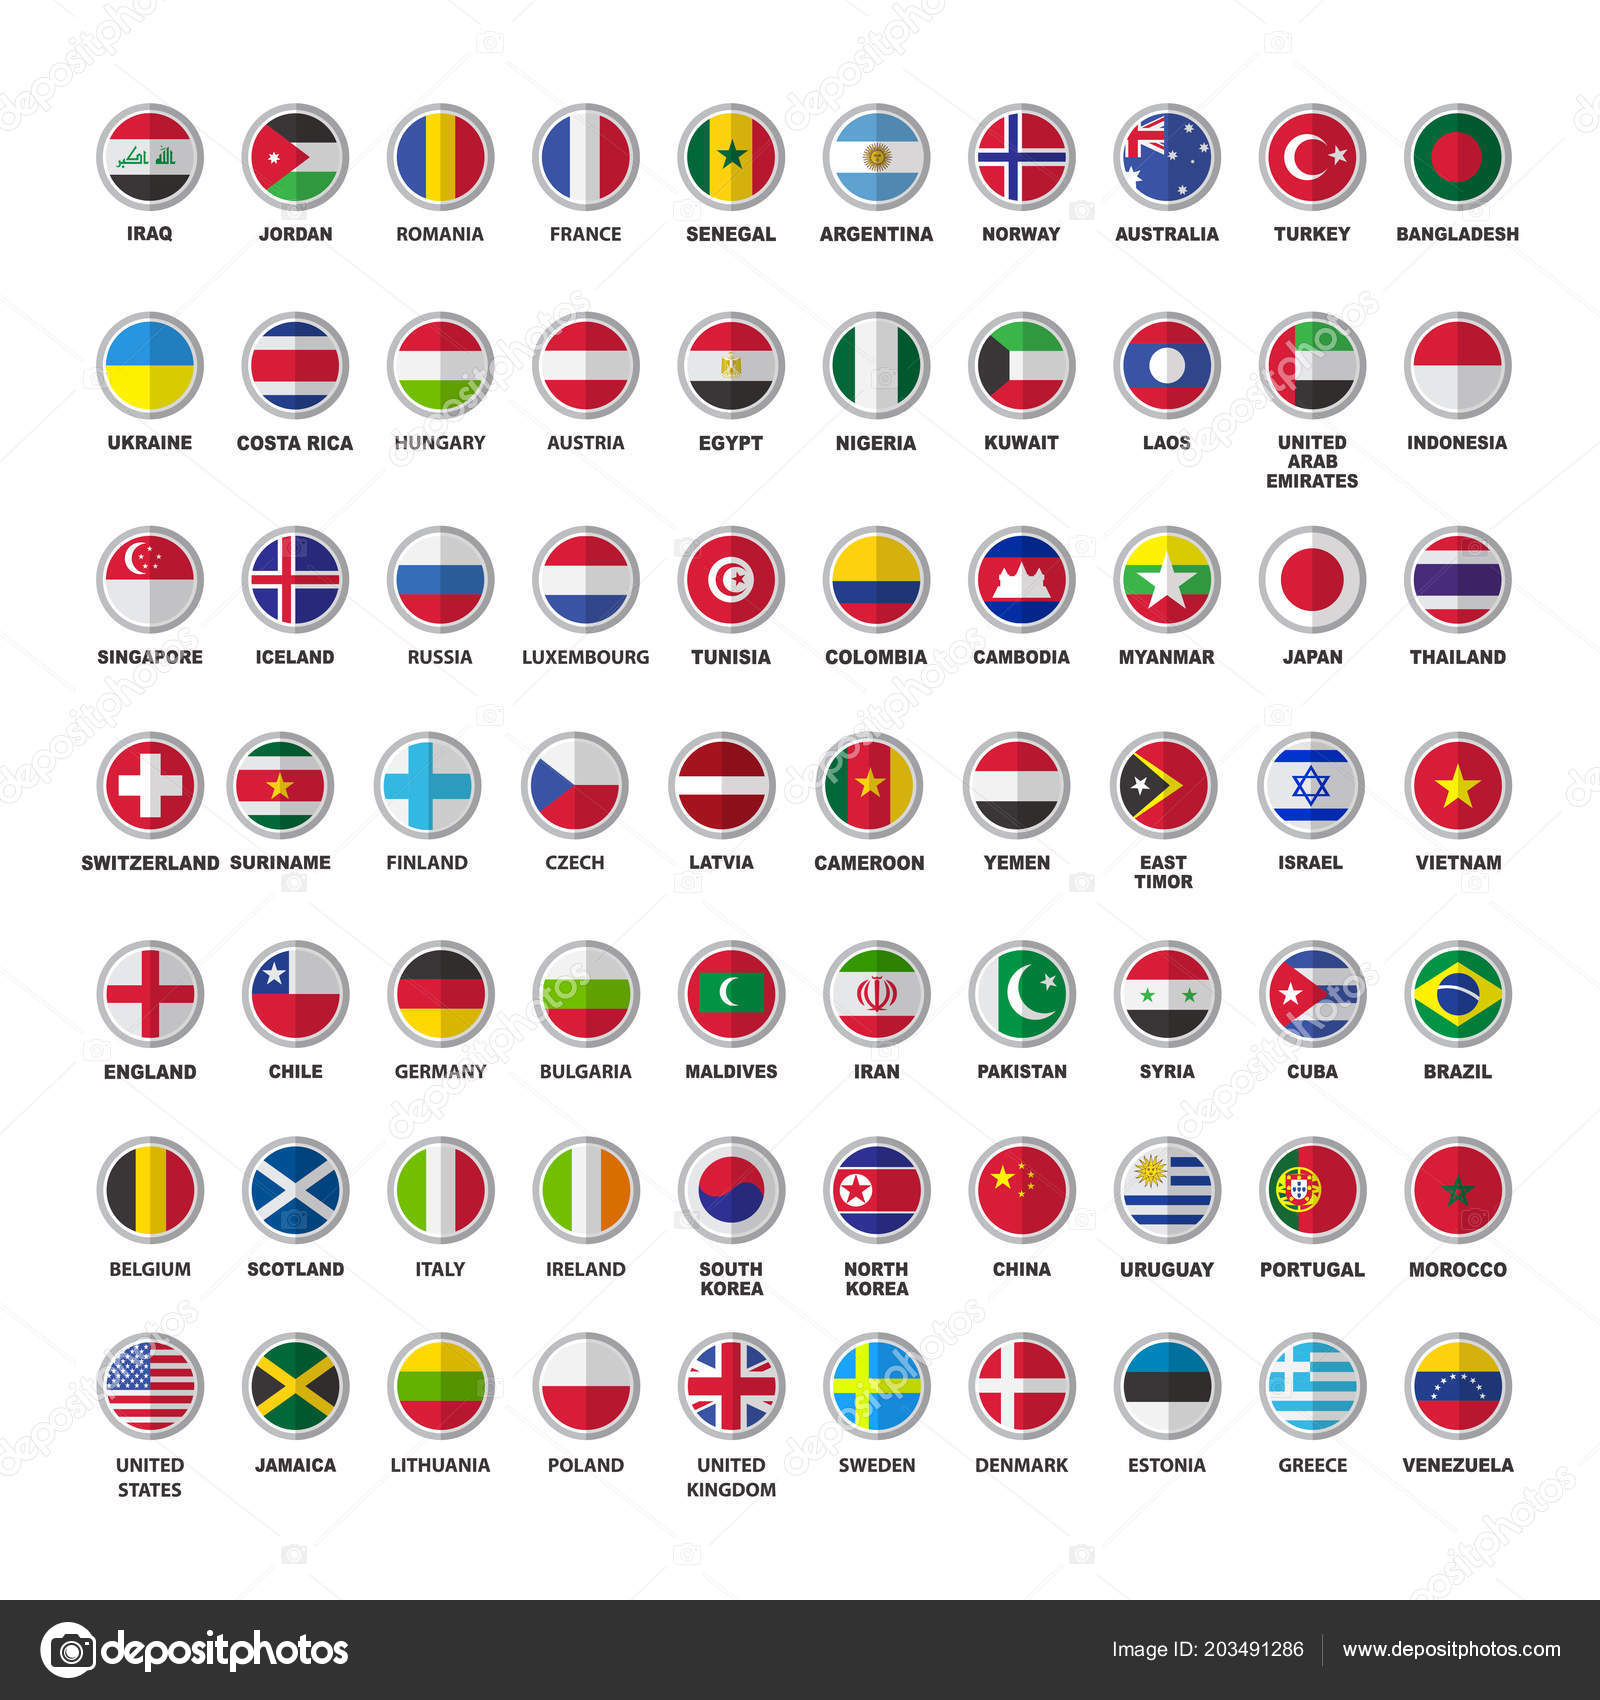 Country flags Euro/Asia/North & South America/Oceania/Africa 3'x2' 